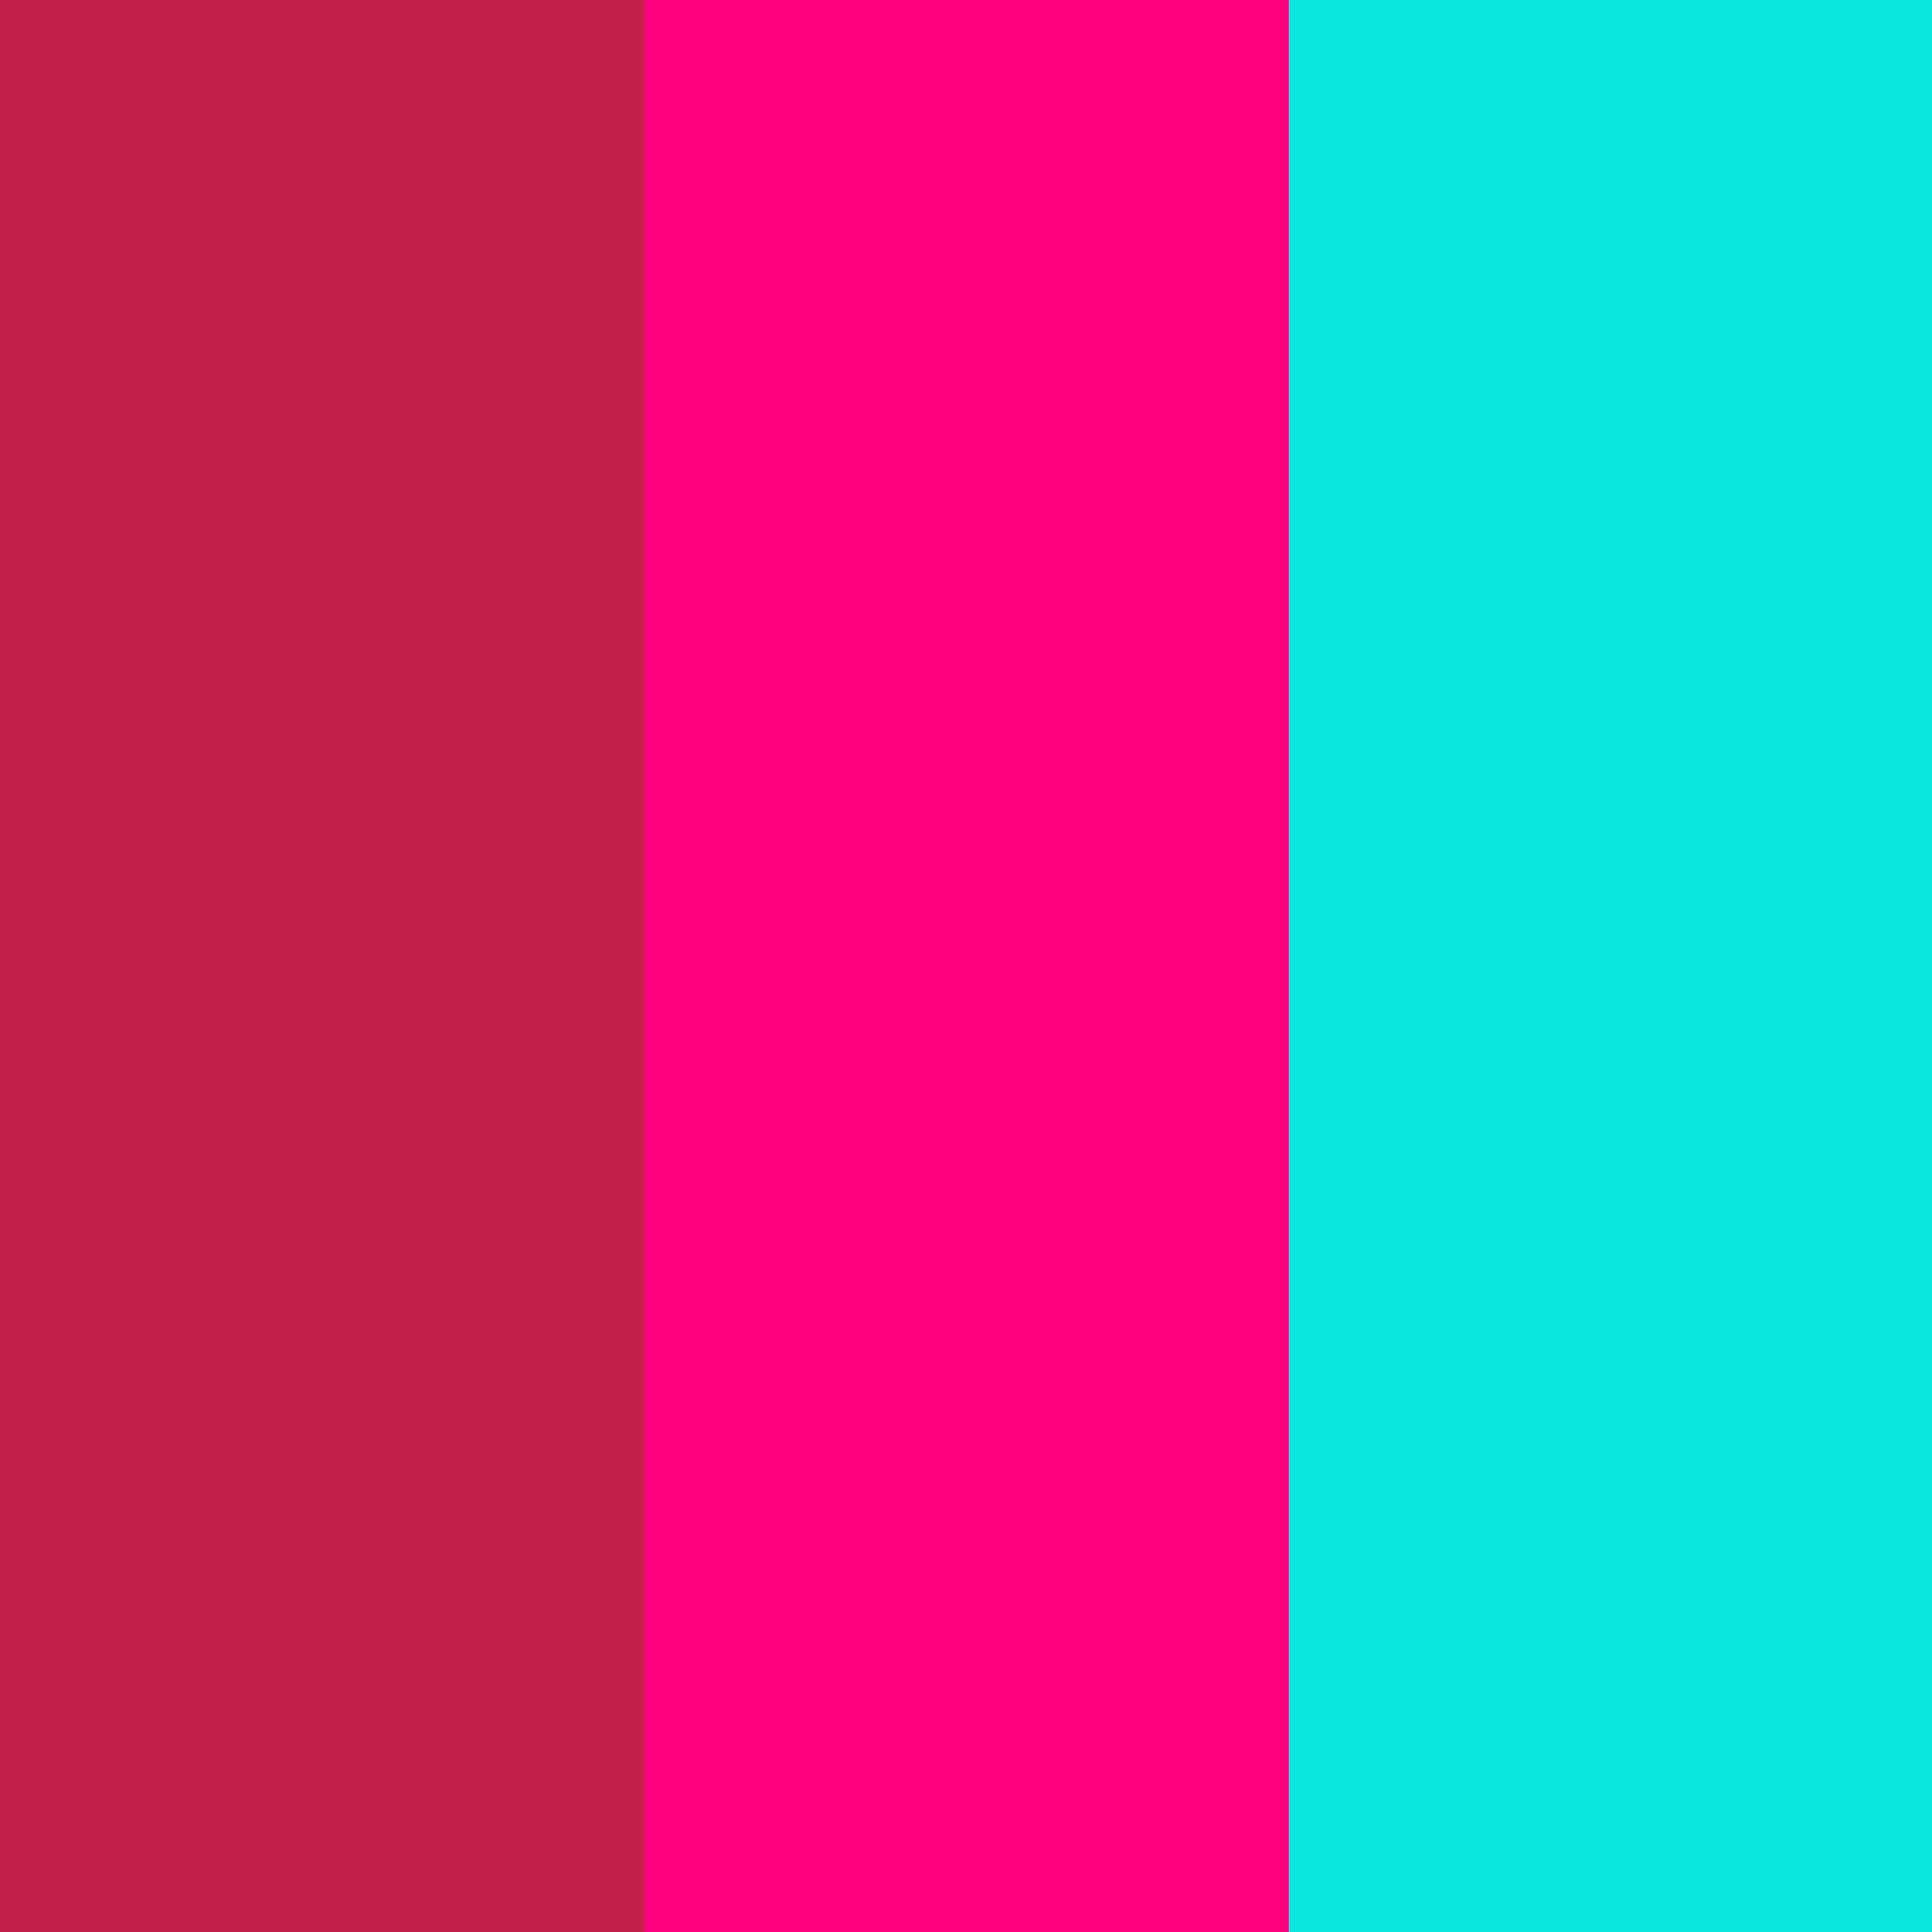 Bright Maroon Pink Turquoise Three Color Background Jpg